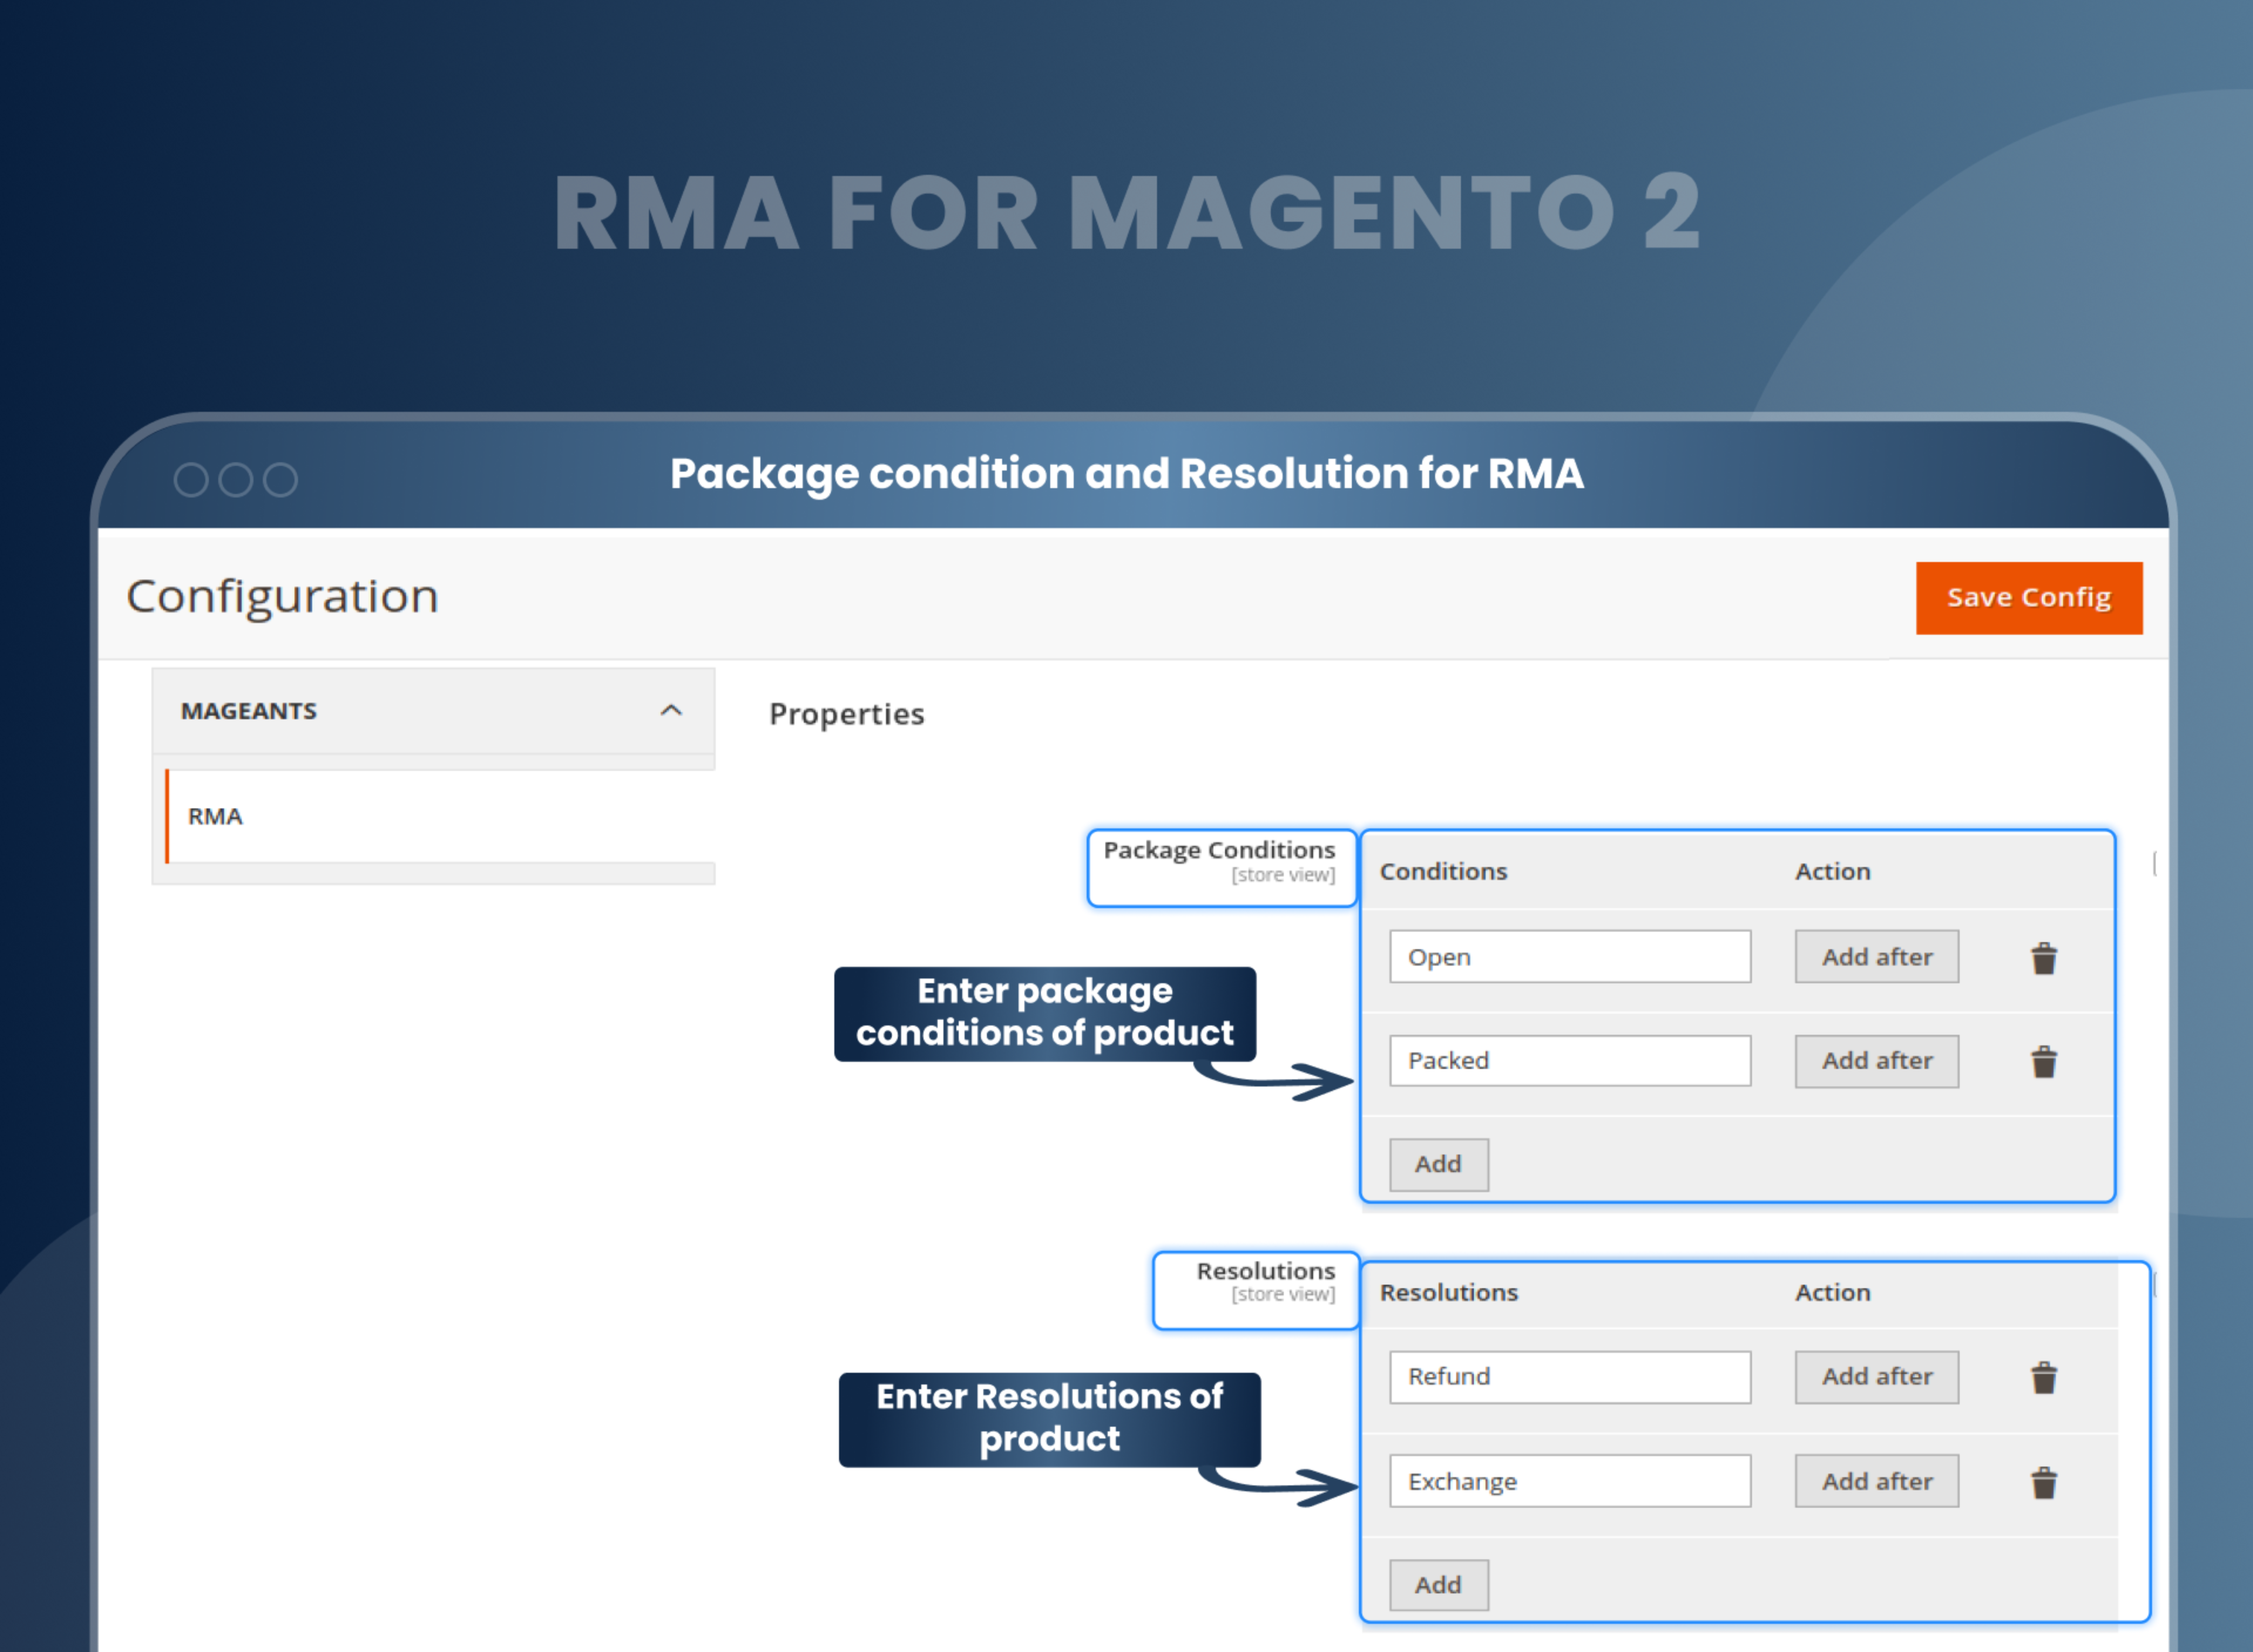 Package condition and Resolution for RMA